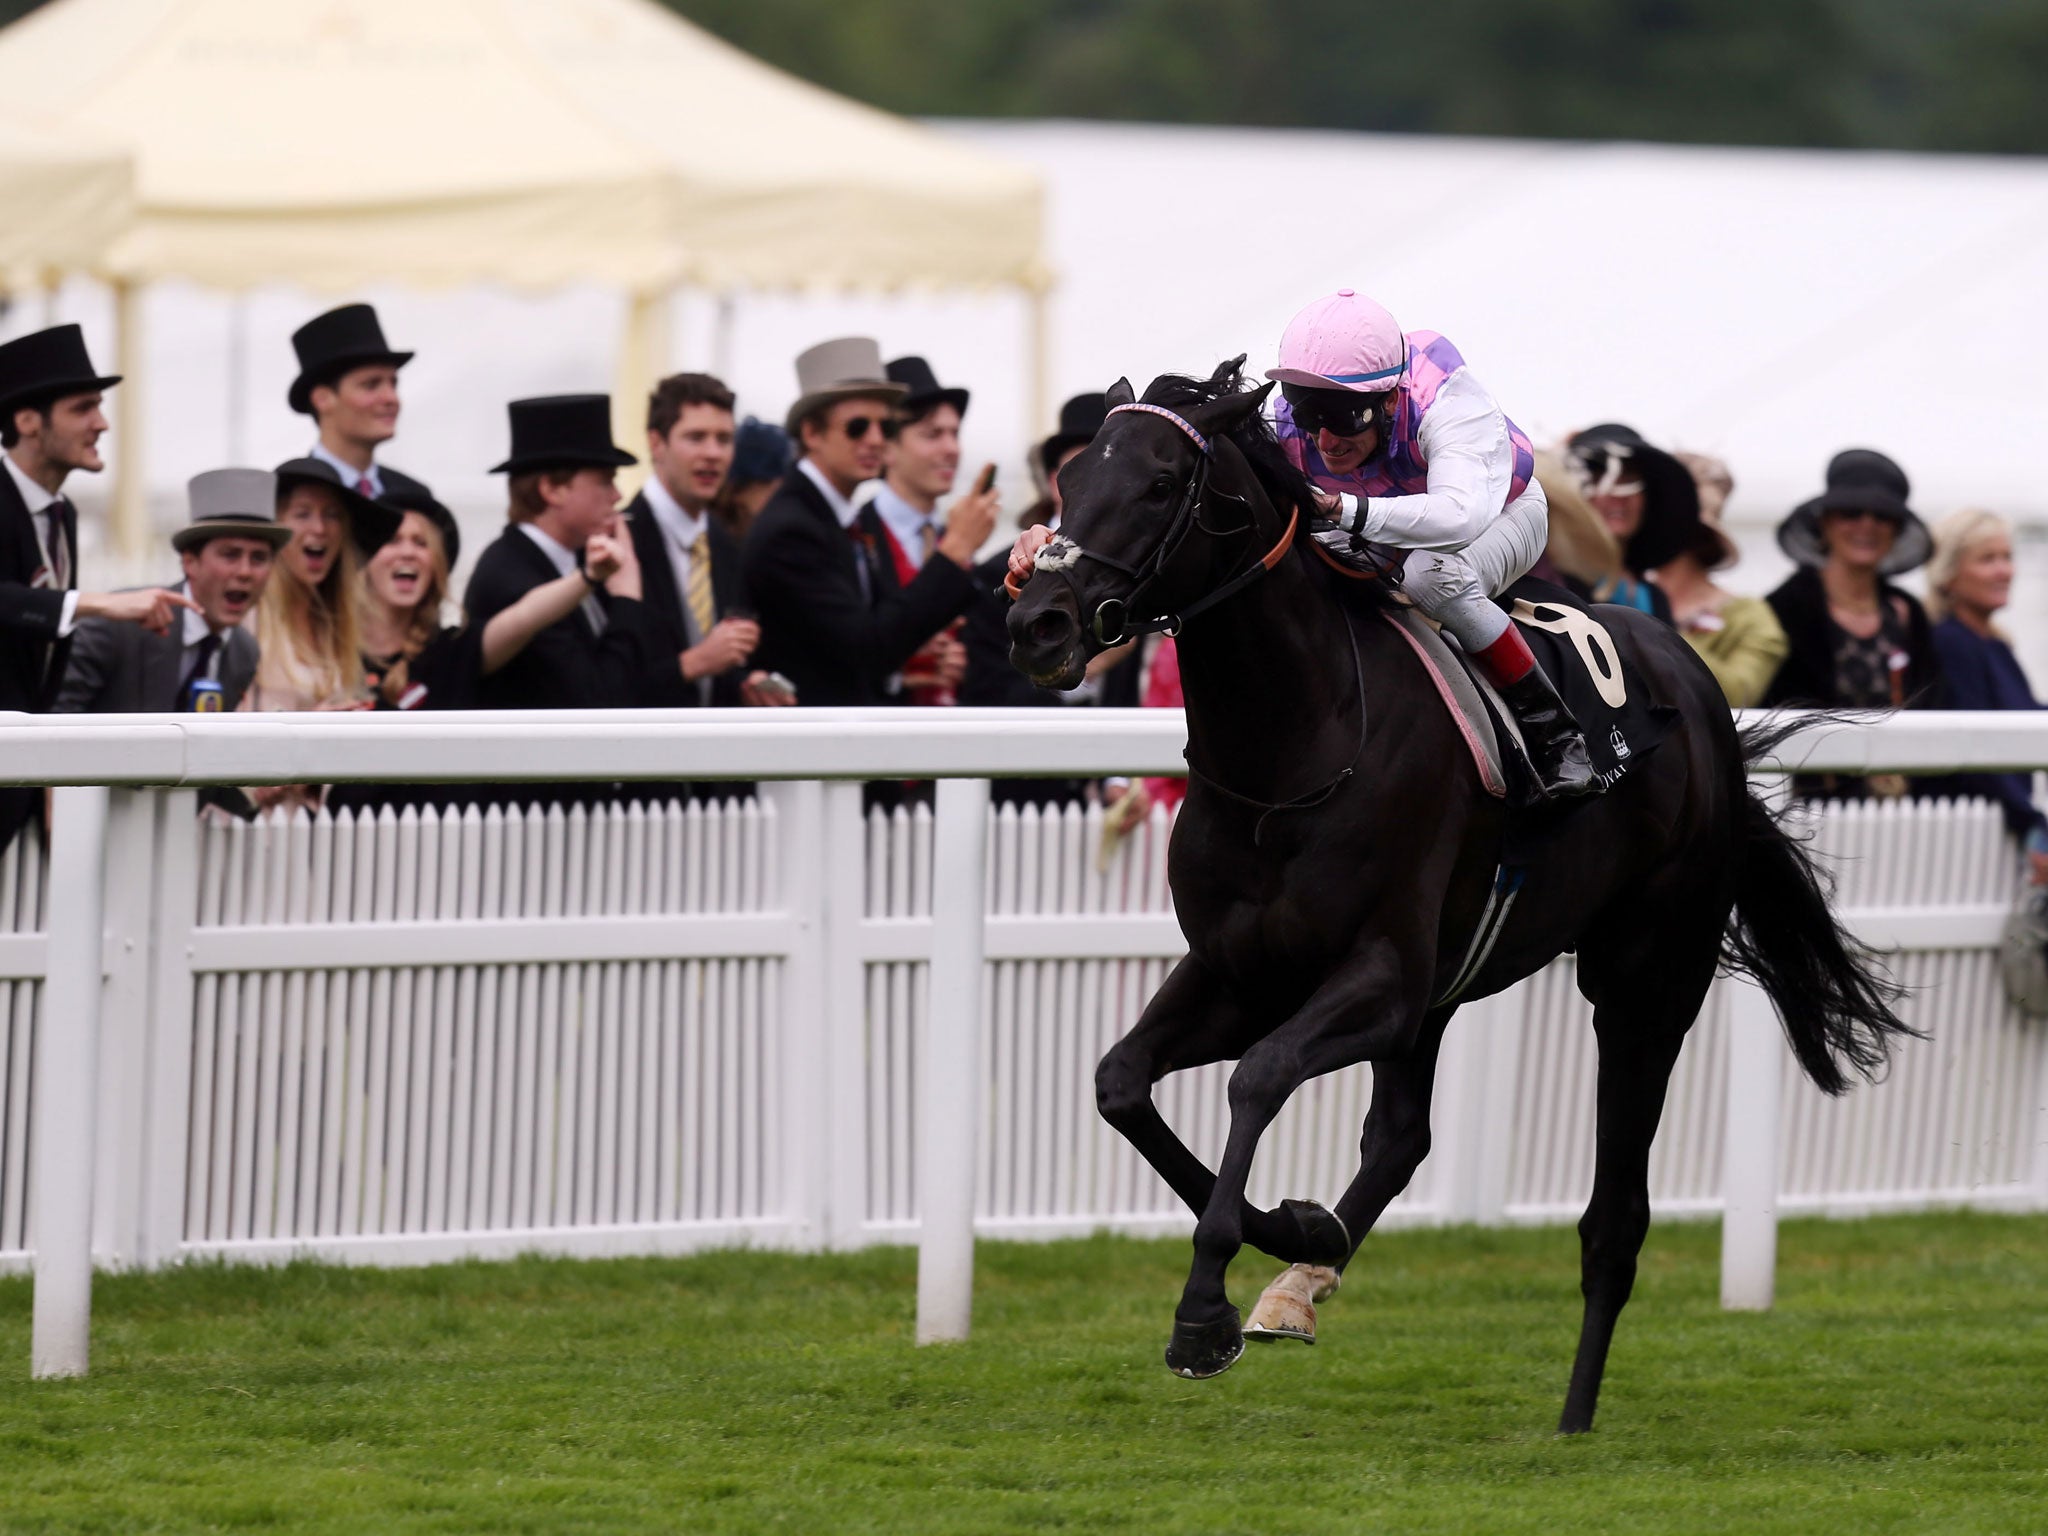 Johnny Murtagh’s mount Thomas Chippendale races to victory in the Hardwicke Stakes only to collapse and die shortly